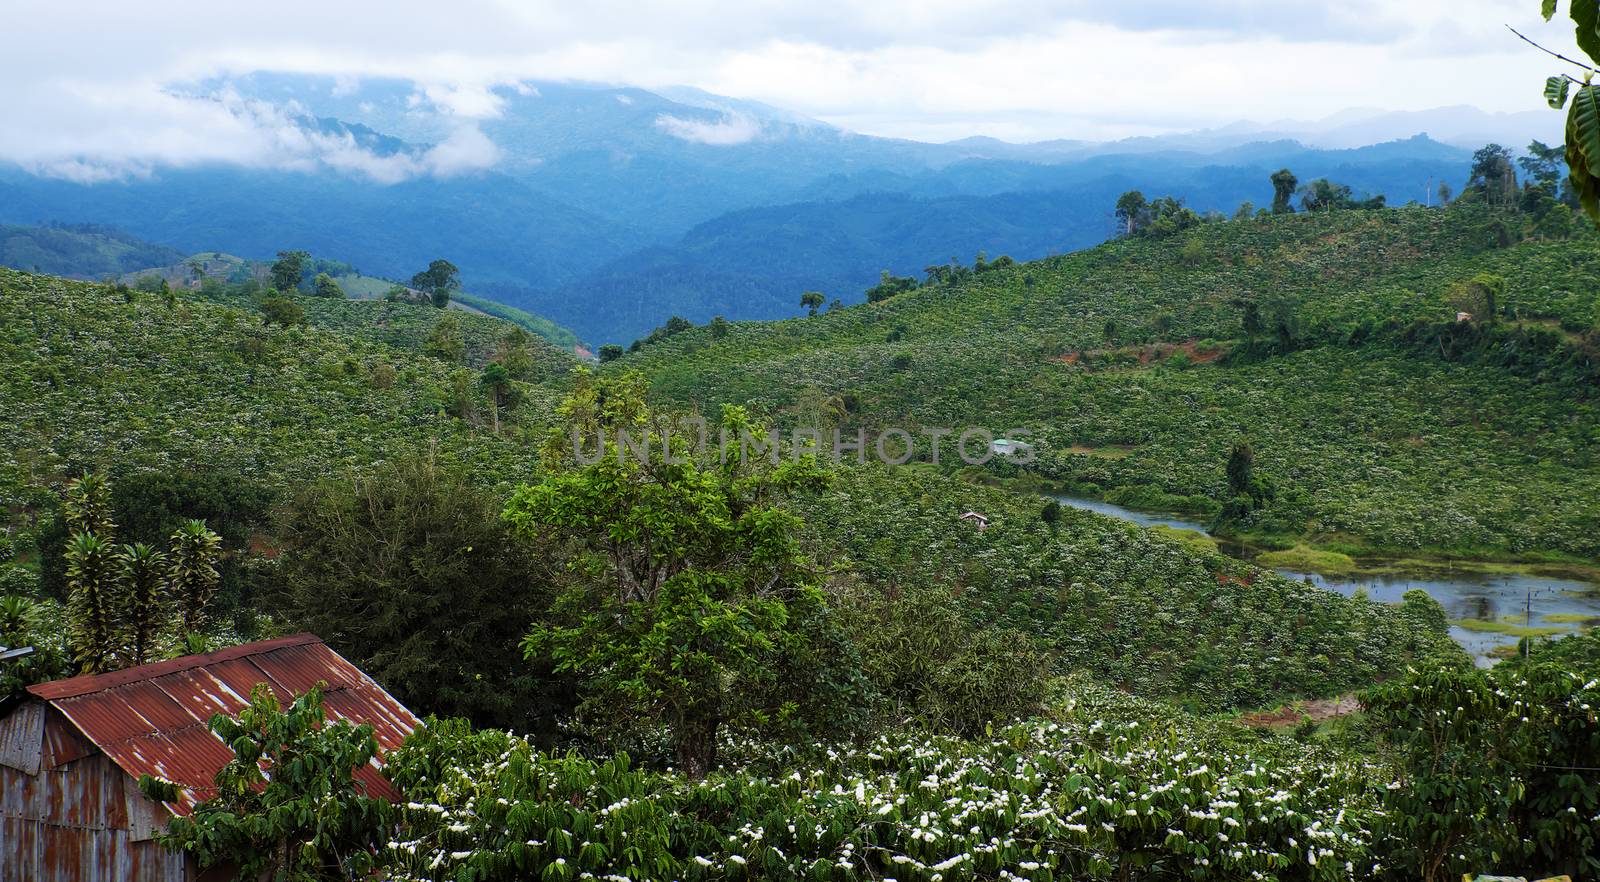 Amazing scene at Vietnamese countryside with wide coffee plantation in blossoms season, white flower from coffee tree make wonderful field from hill, a small house among farm at Lam Dong, Vietnam